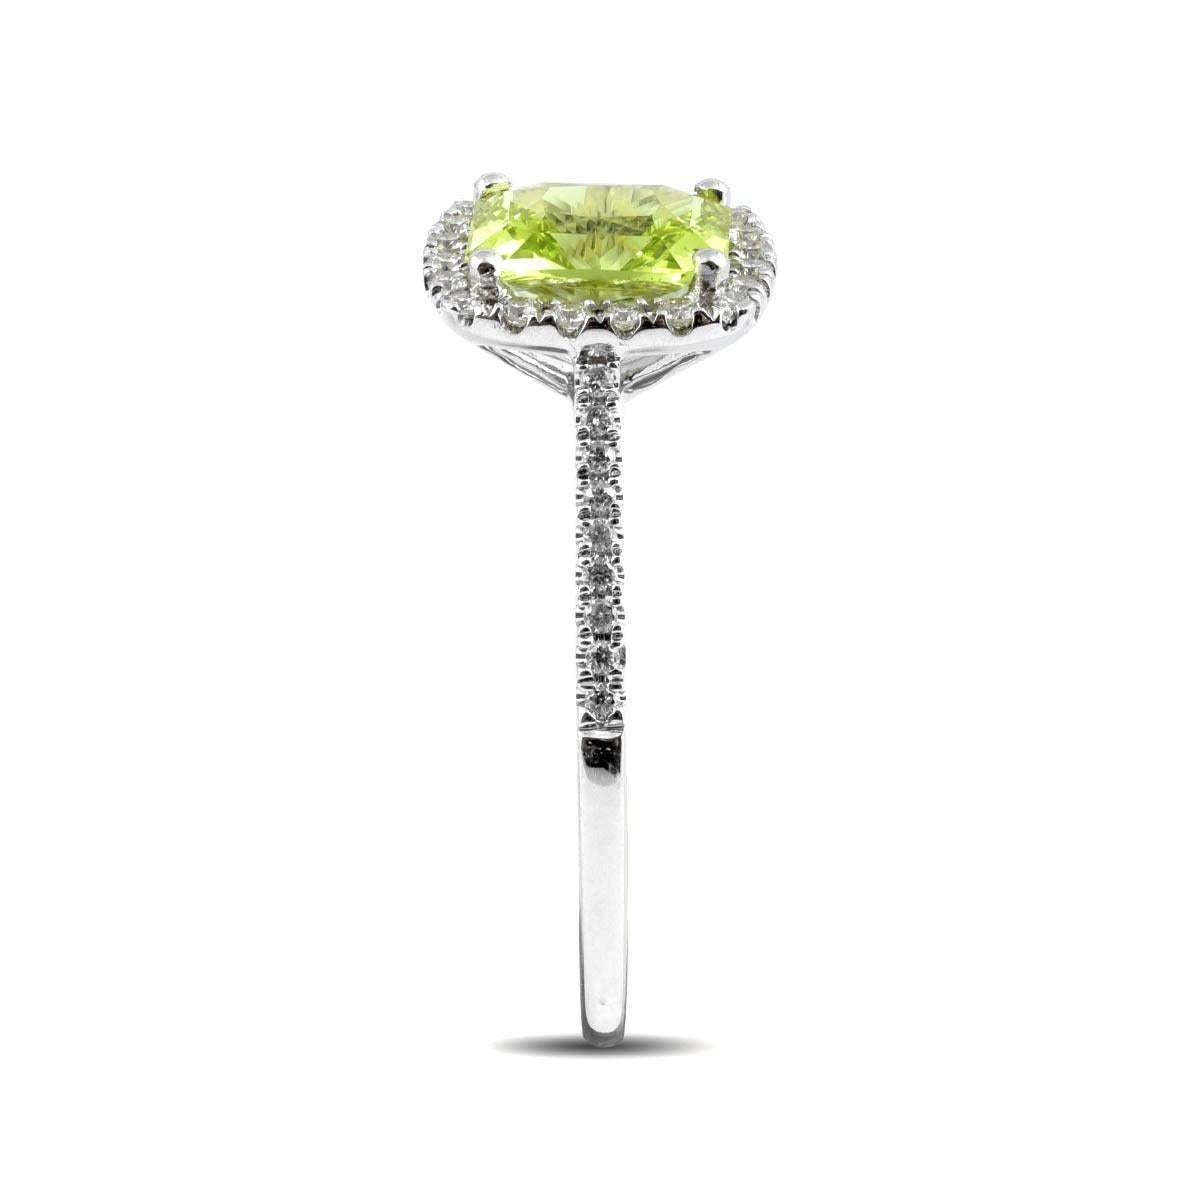 Mixed Cut 1.33 Carats Chrysoberyl Diamonds set in 14K White Gold Ring For Sale